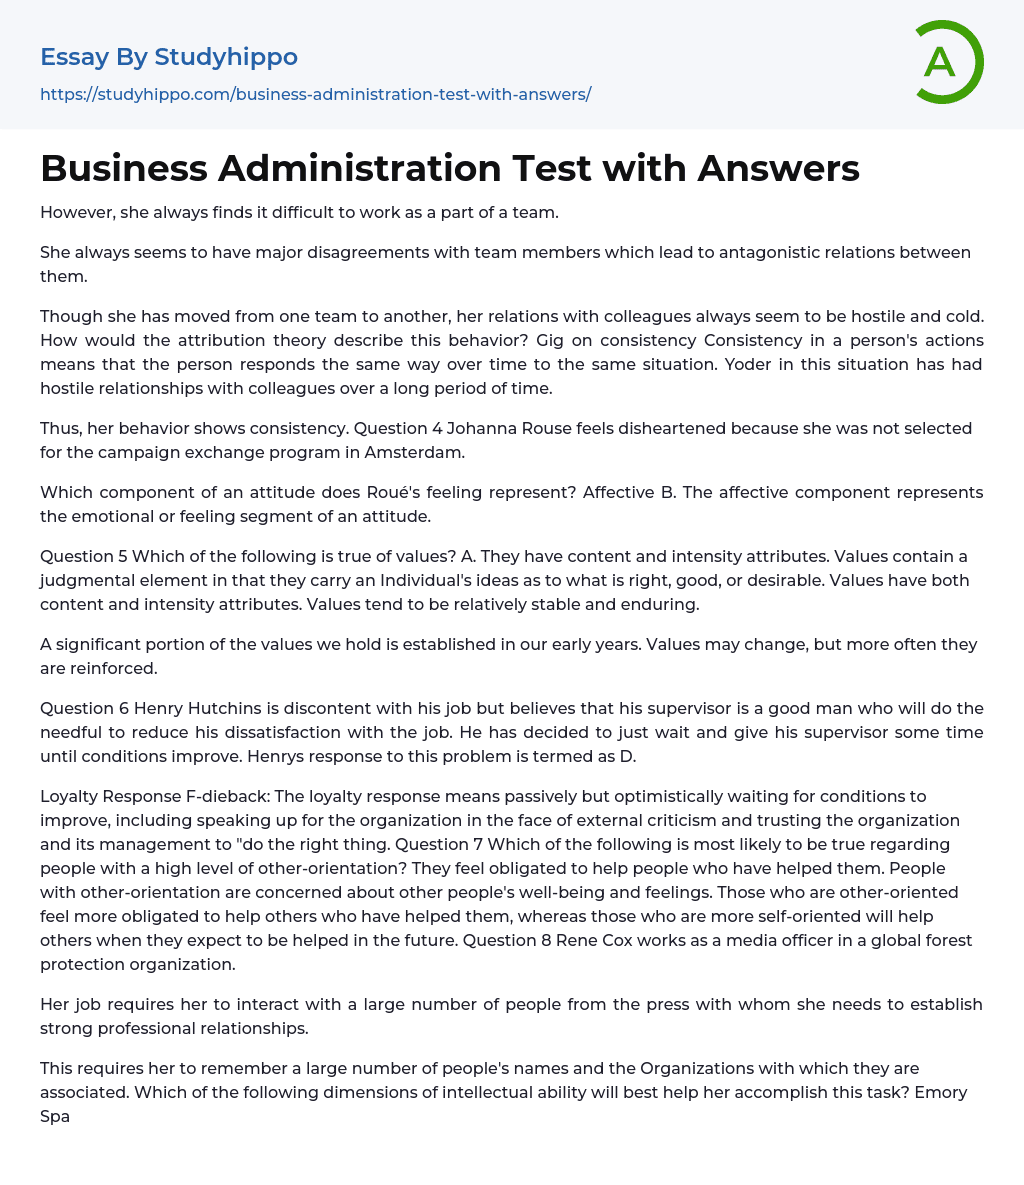 Business Administration Test with Answers Essay Example